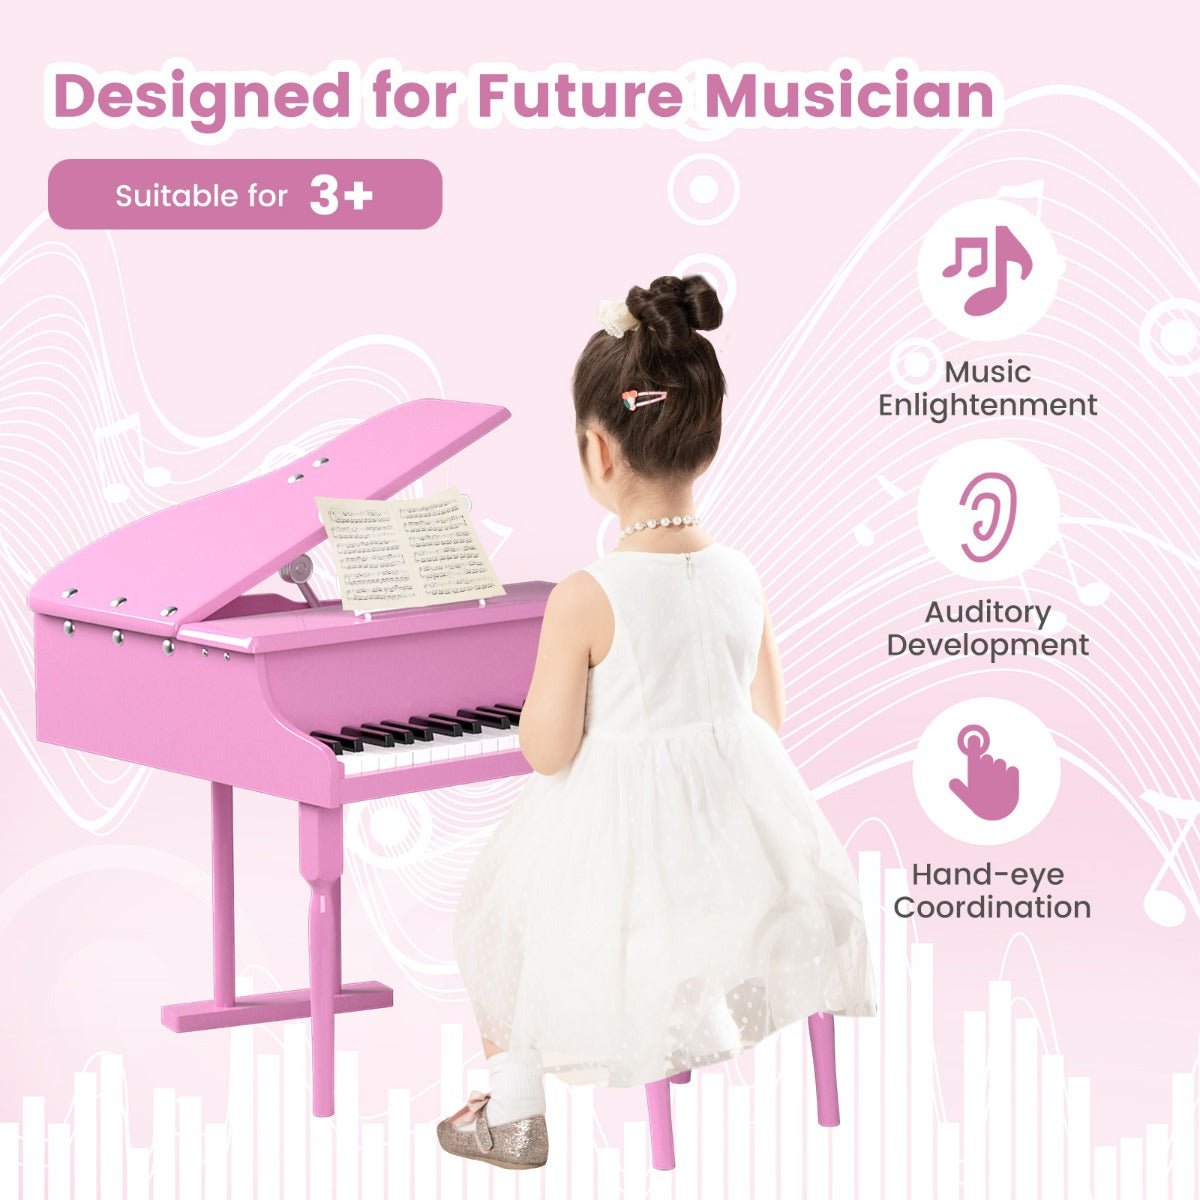 30-Key Piano Keyboard Toy - Order Now for Musical Joy